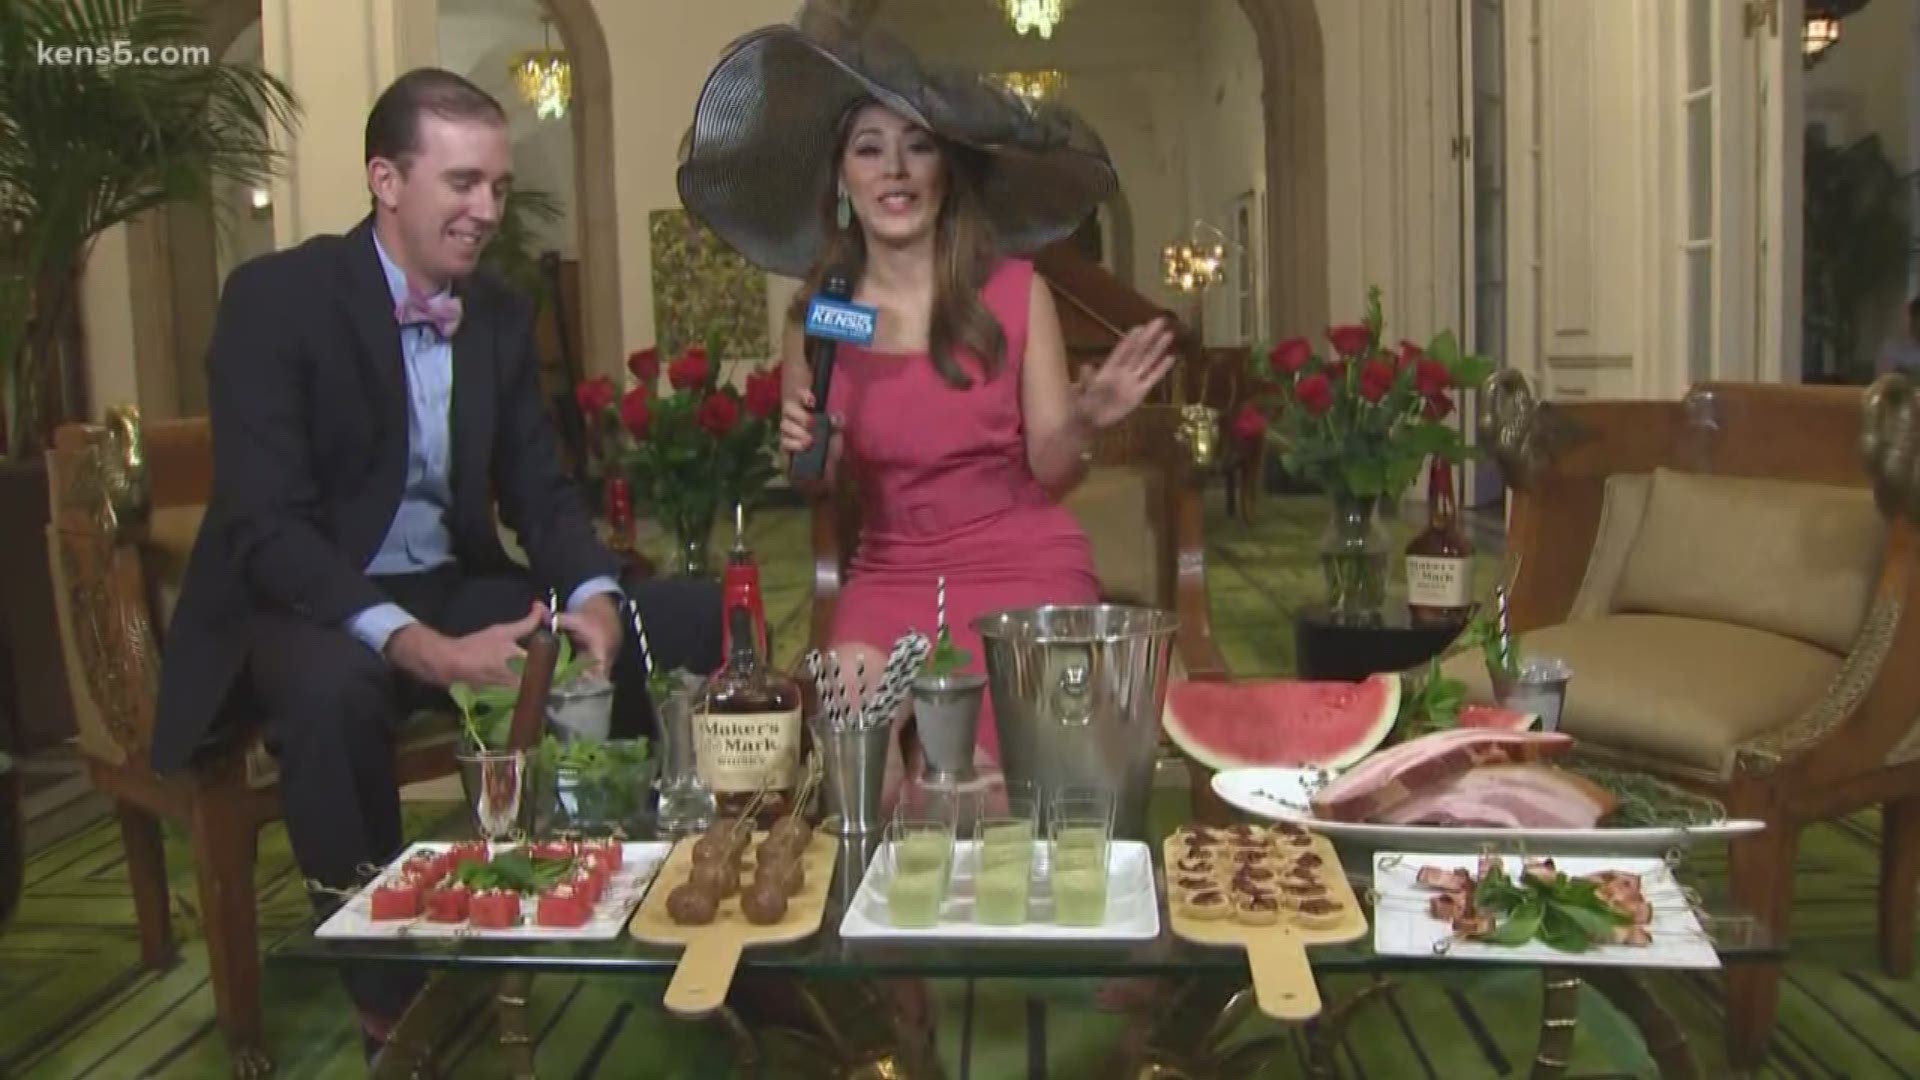 The track is ready and the field is set for the 145th Kentucky Derby. But if you can't make the trip to Churchill Downs, you can still get in on all of the fun here in San Antonio. Audrey Castoreno joins us from the St. Anthony Hotel is getting ready for their Triple Crown Derby Party!